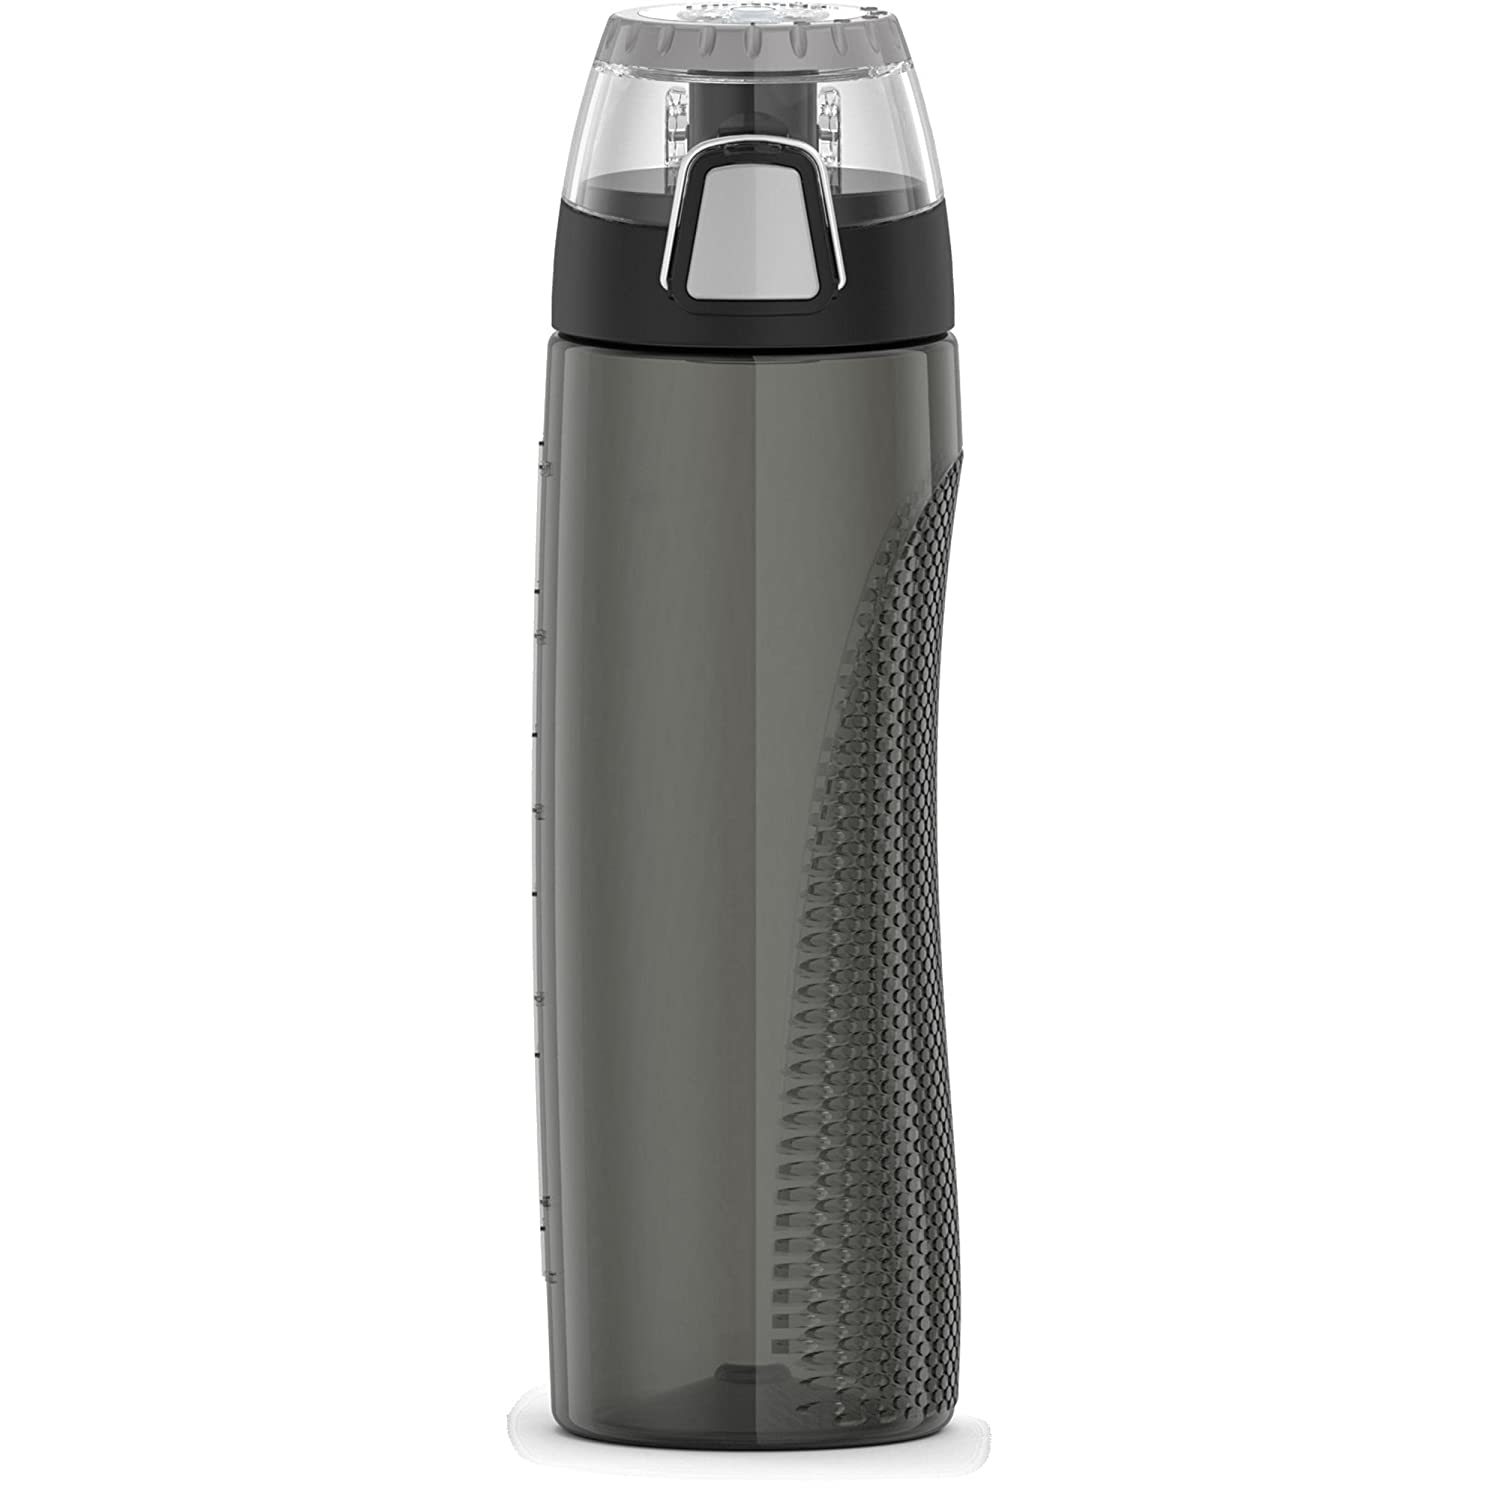 THERMOS Intak 24 Ounce Hydration Bottle with Meter, Smoke - $39.99